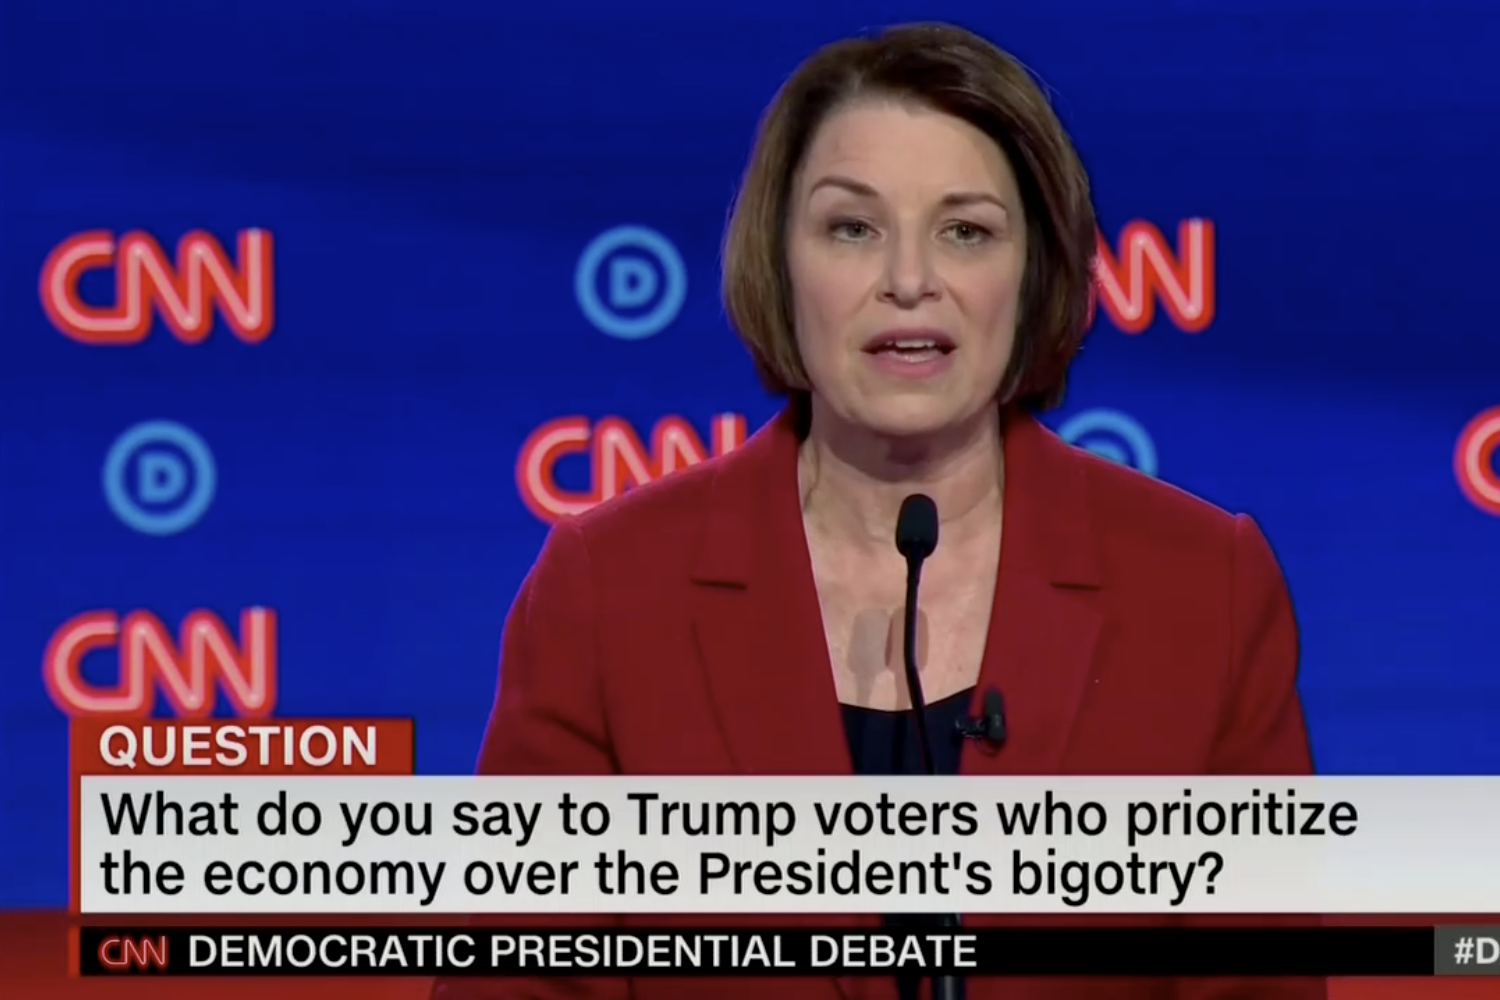 In this screengrab from CNN, Amy Klobuchar debates. The banner reads: “What do you say to Trump voters who prioritize the economy over the President's bigotry?”